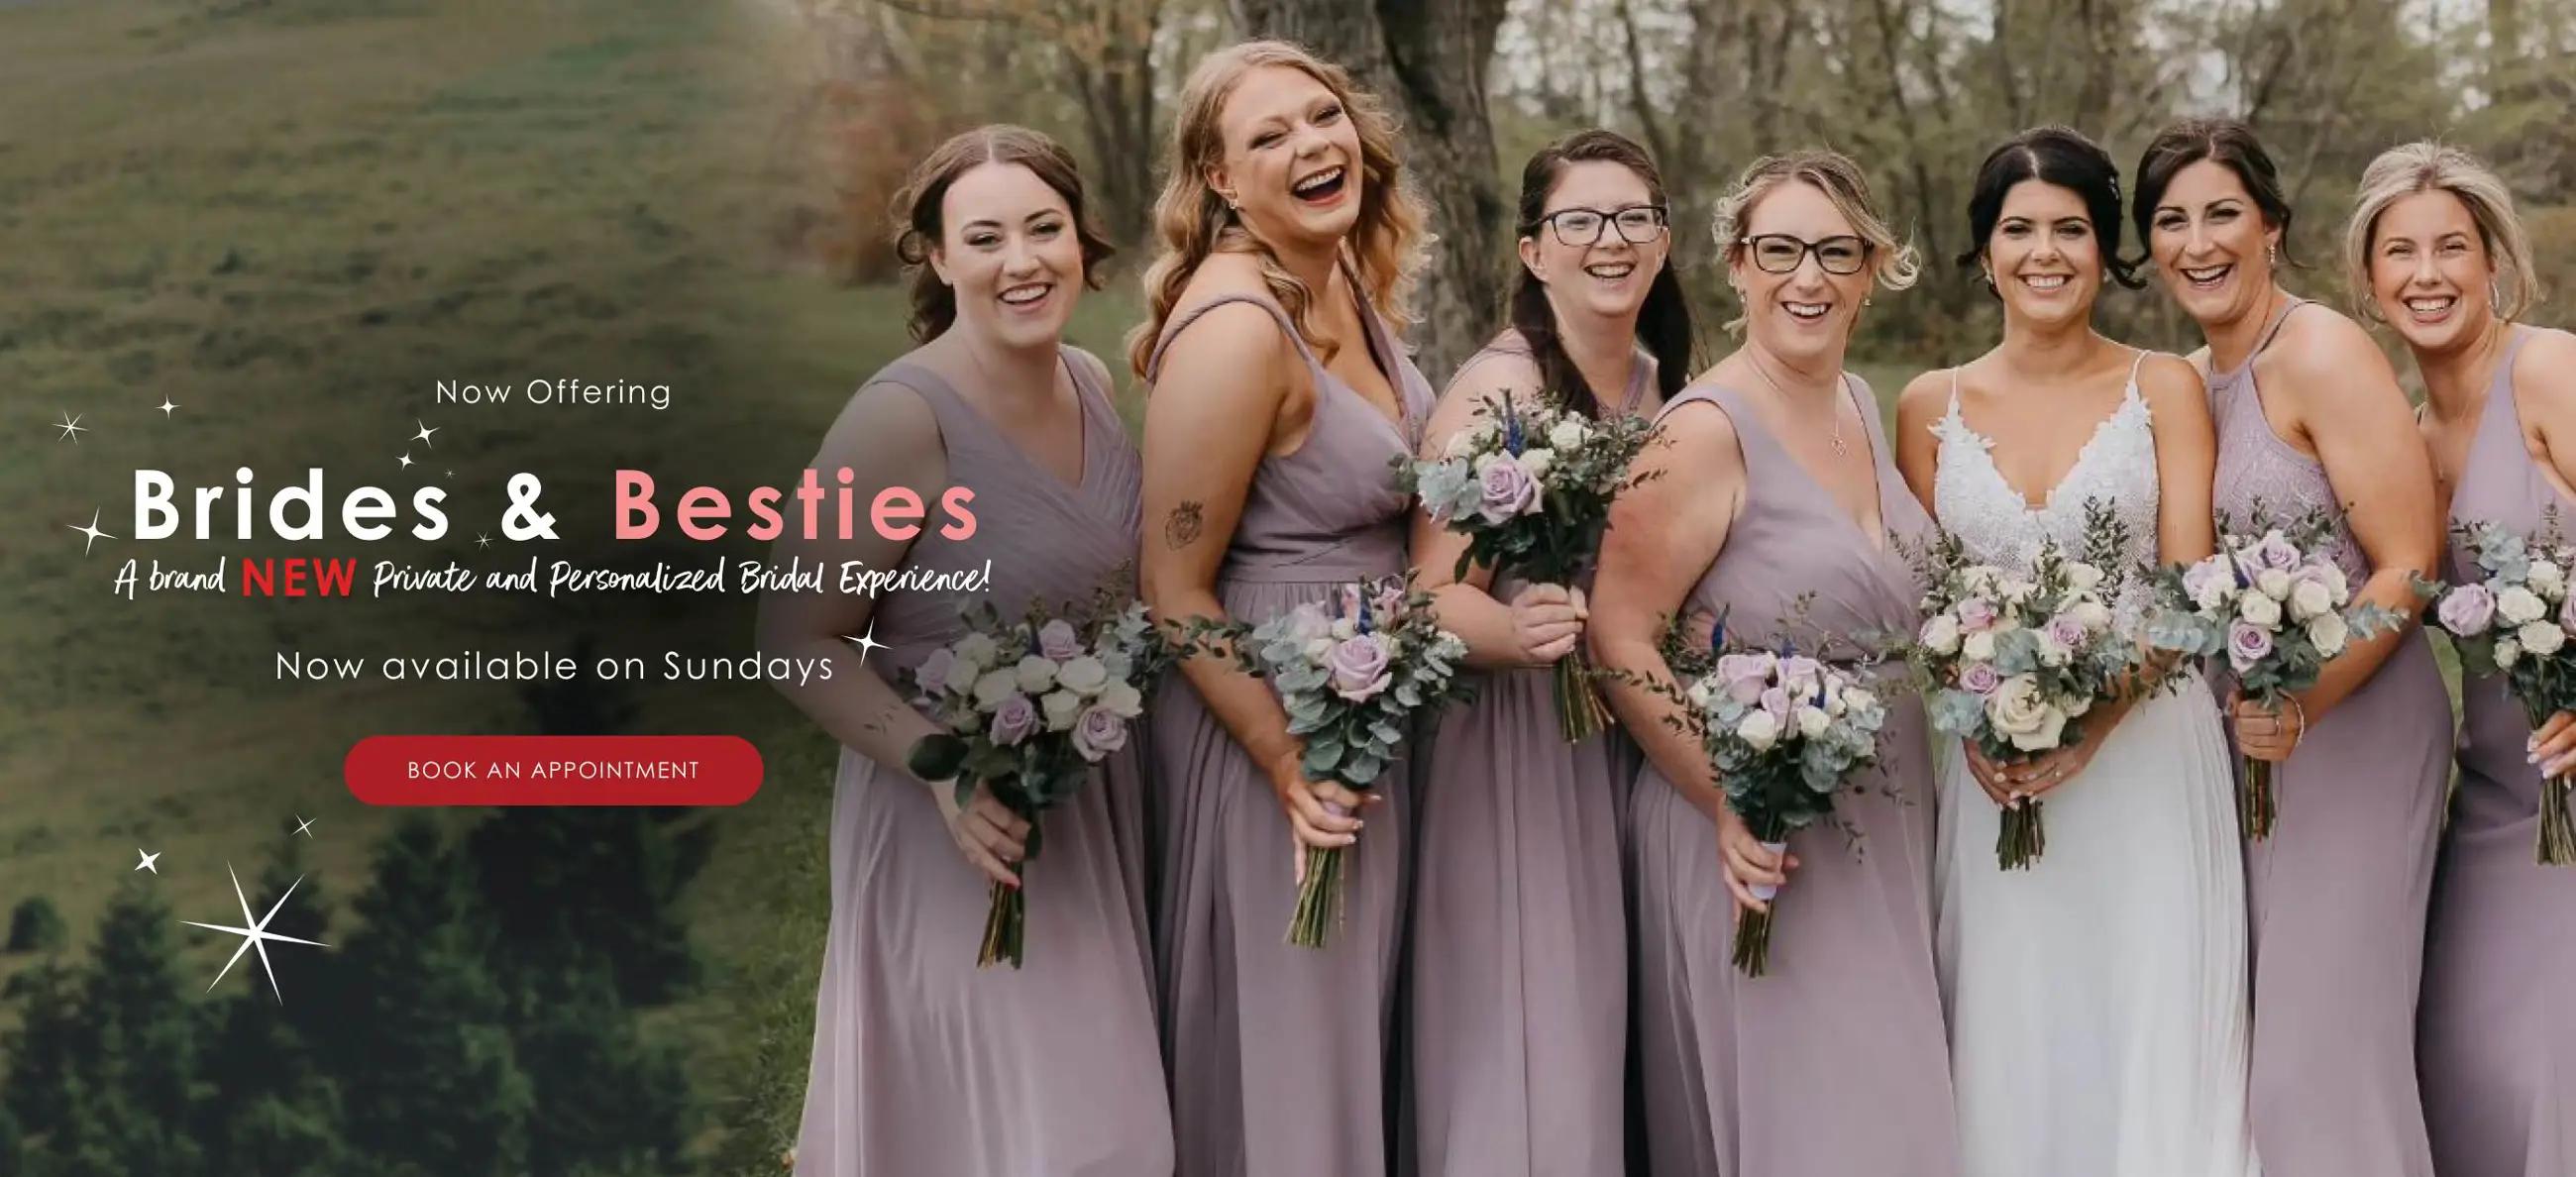 Brides and Besties Bridal Package at It's Your Day Bridal. Bride and her bridesmaids.